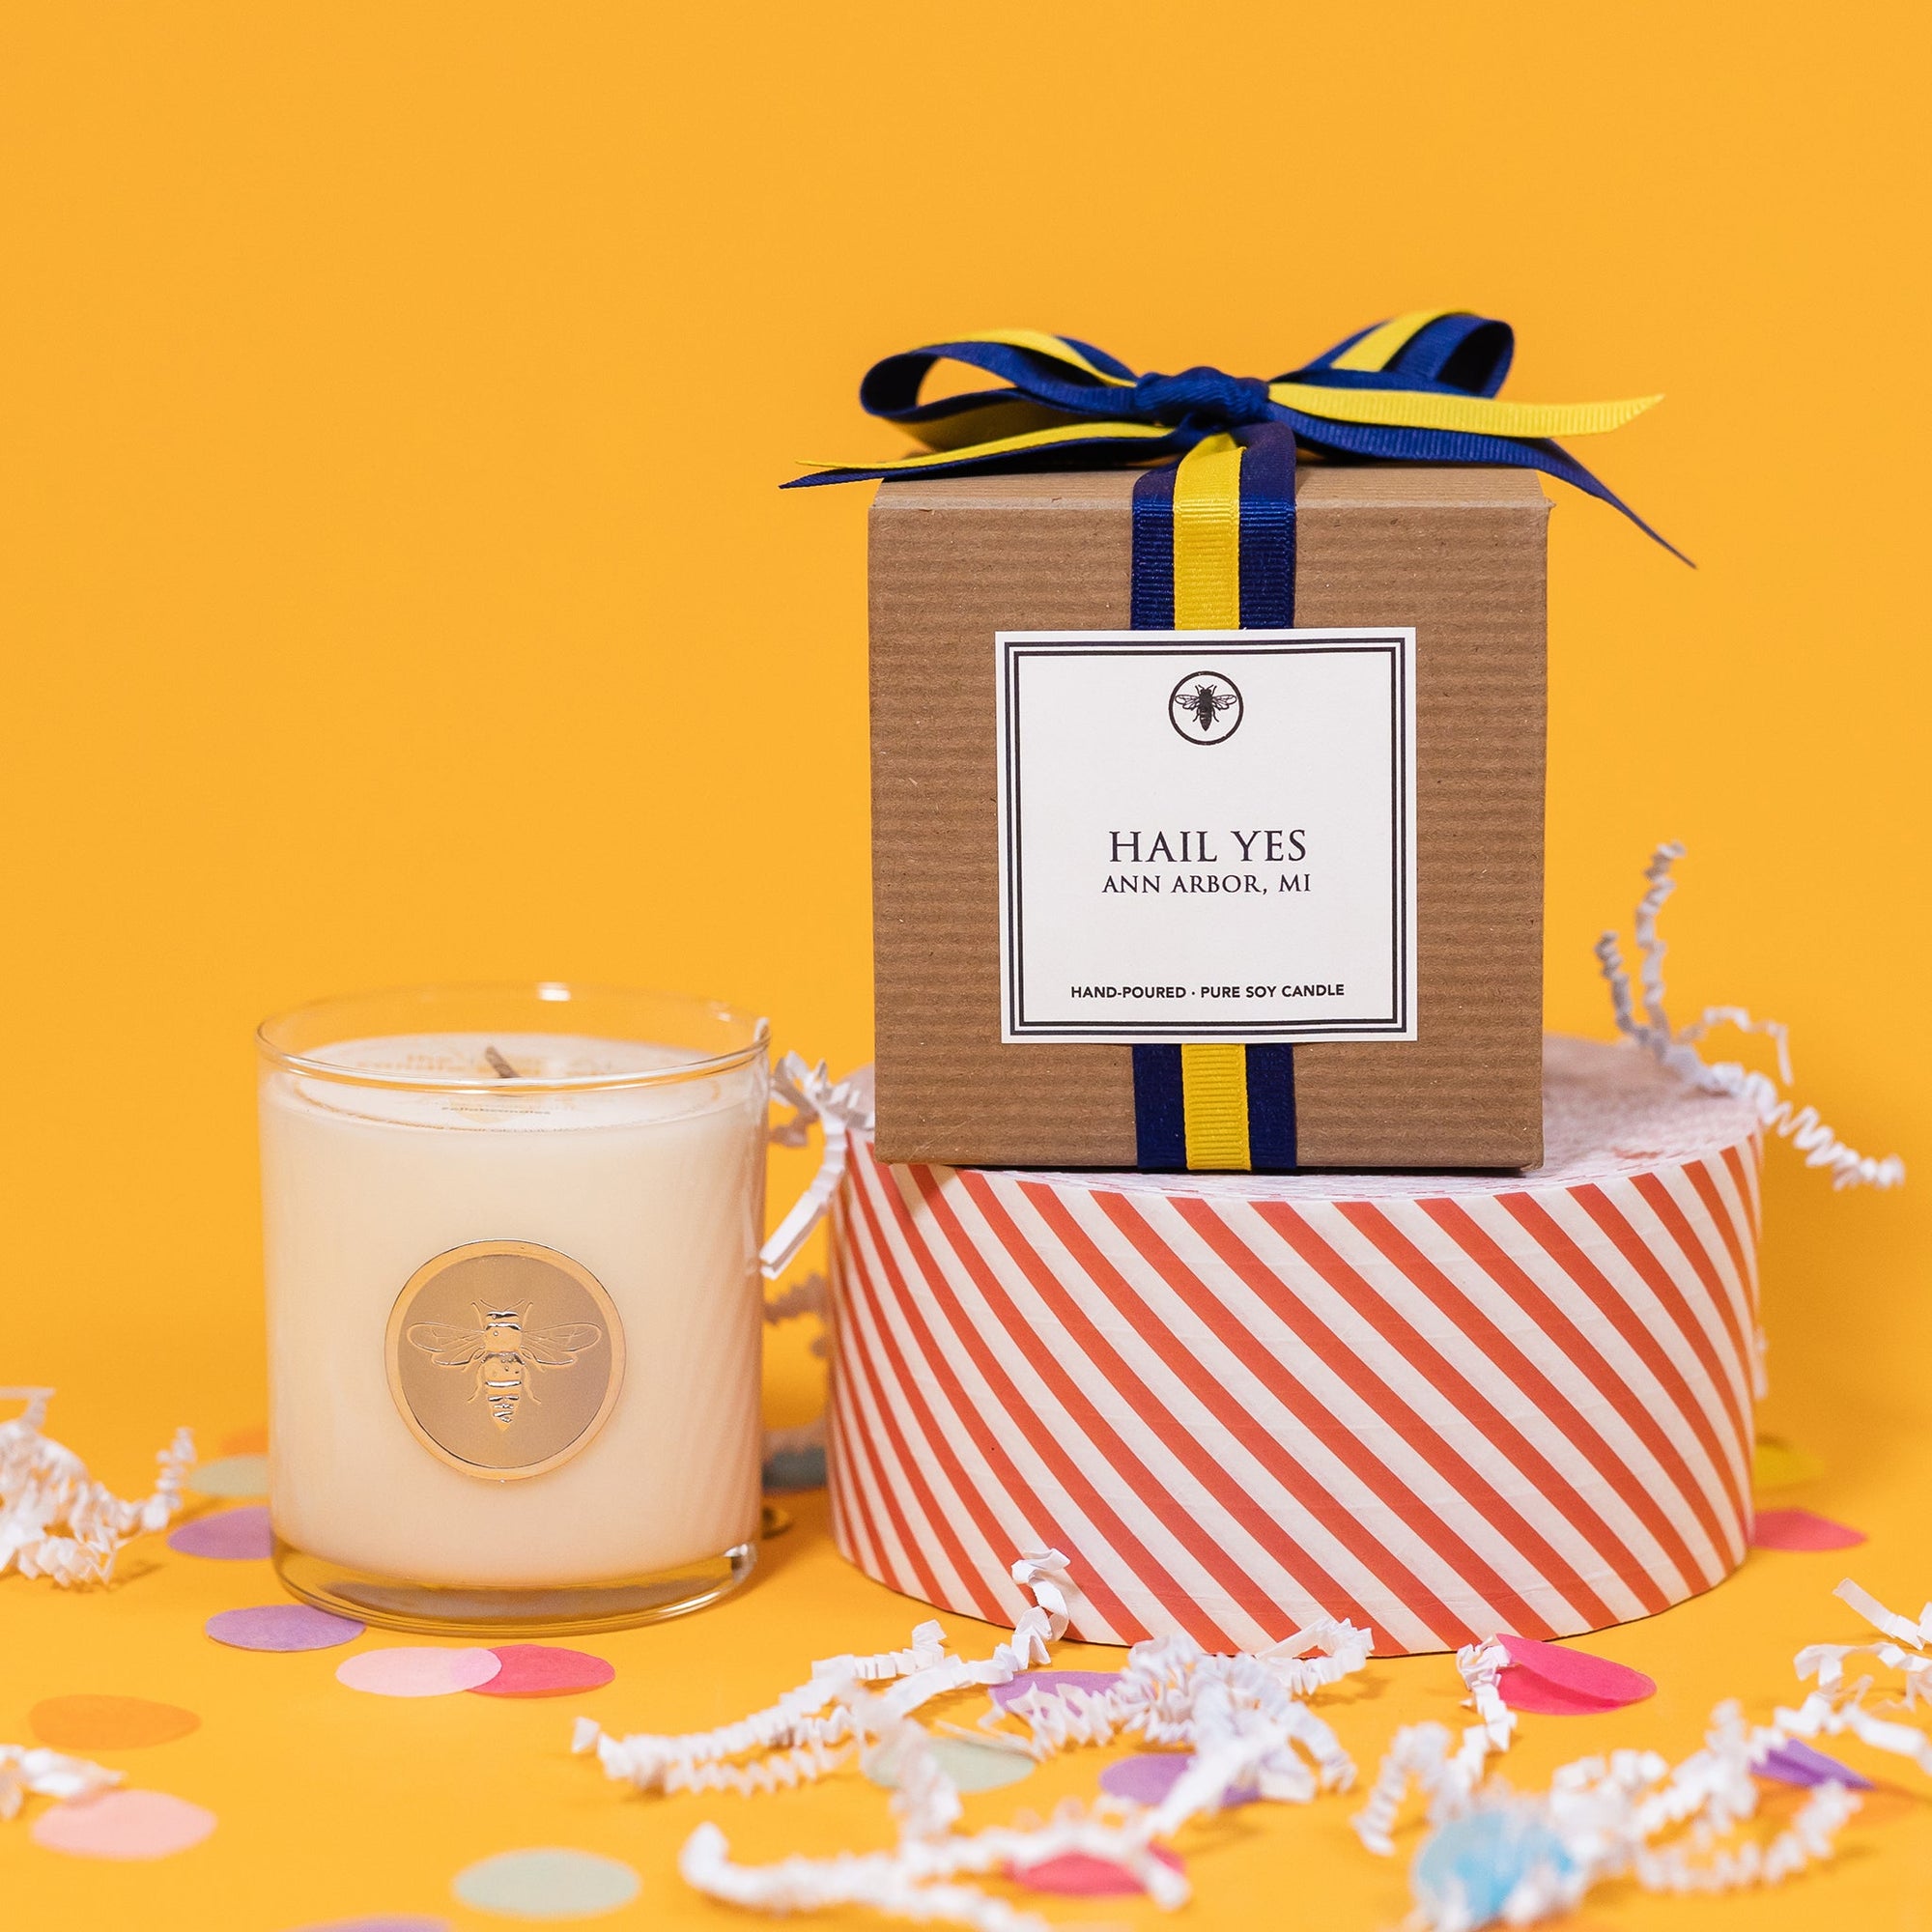 On a sunny mustard background is a candle with a box and white crinkle with big, colorful confetti scattered around. The clear glass candle has a gold foil round label with an illustration of a bee on it. There is a kraft box with yellow and navy striped ribbon tied at the top and on the front is a square white label that says "Hail Yes Ann Arbor Mi" and it sits atop a red and white striped packing tape. The candle is a "Hand-poured, pure soy candle."